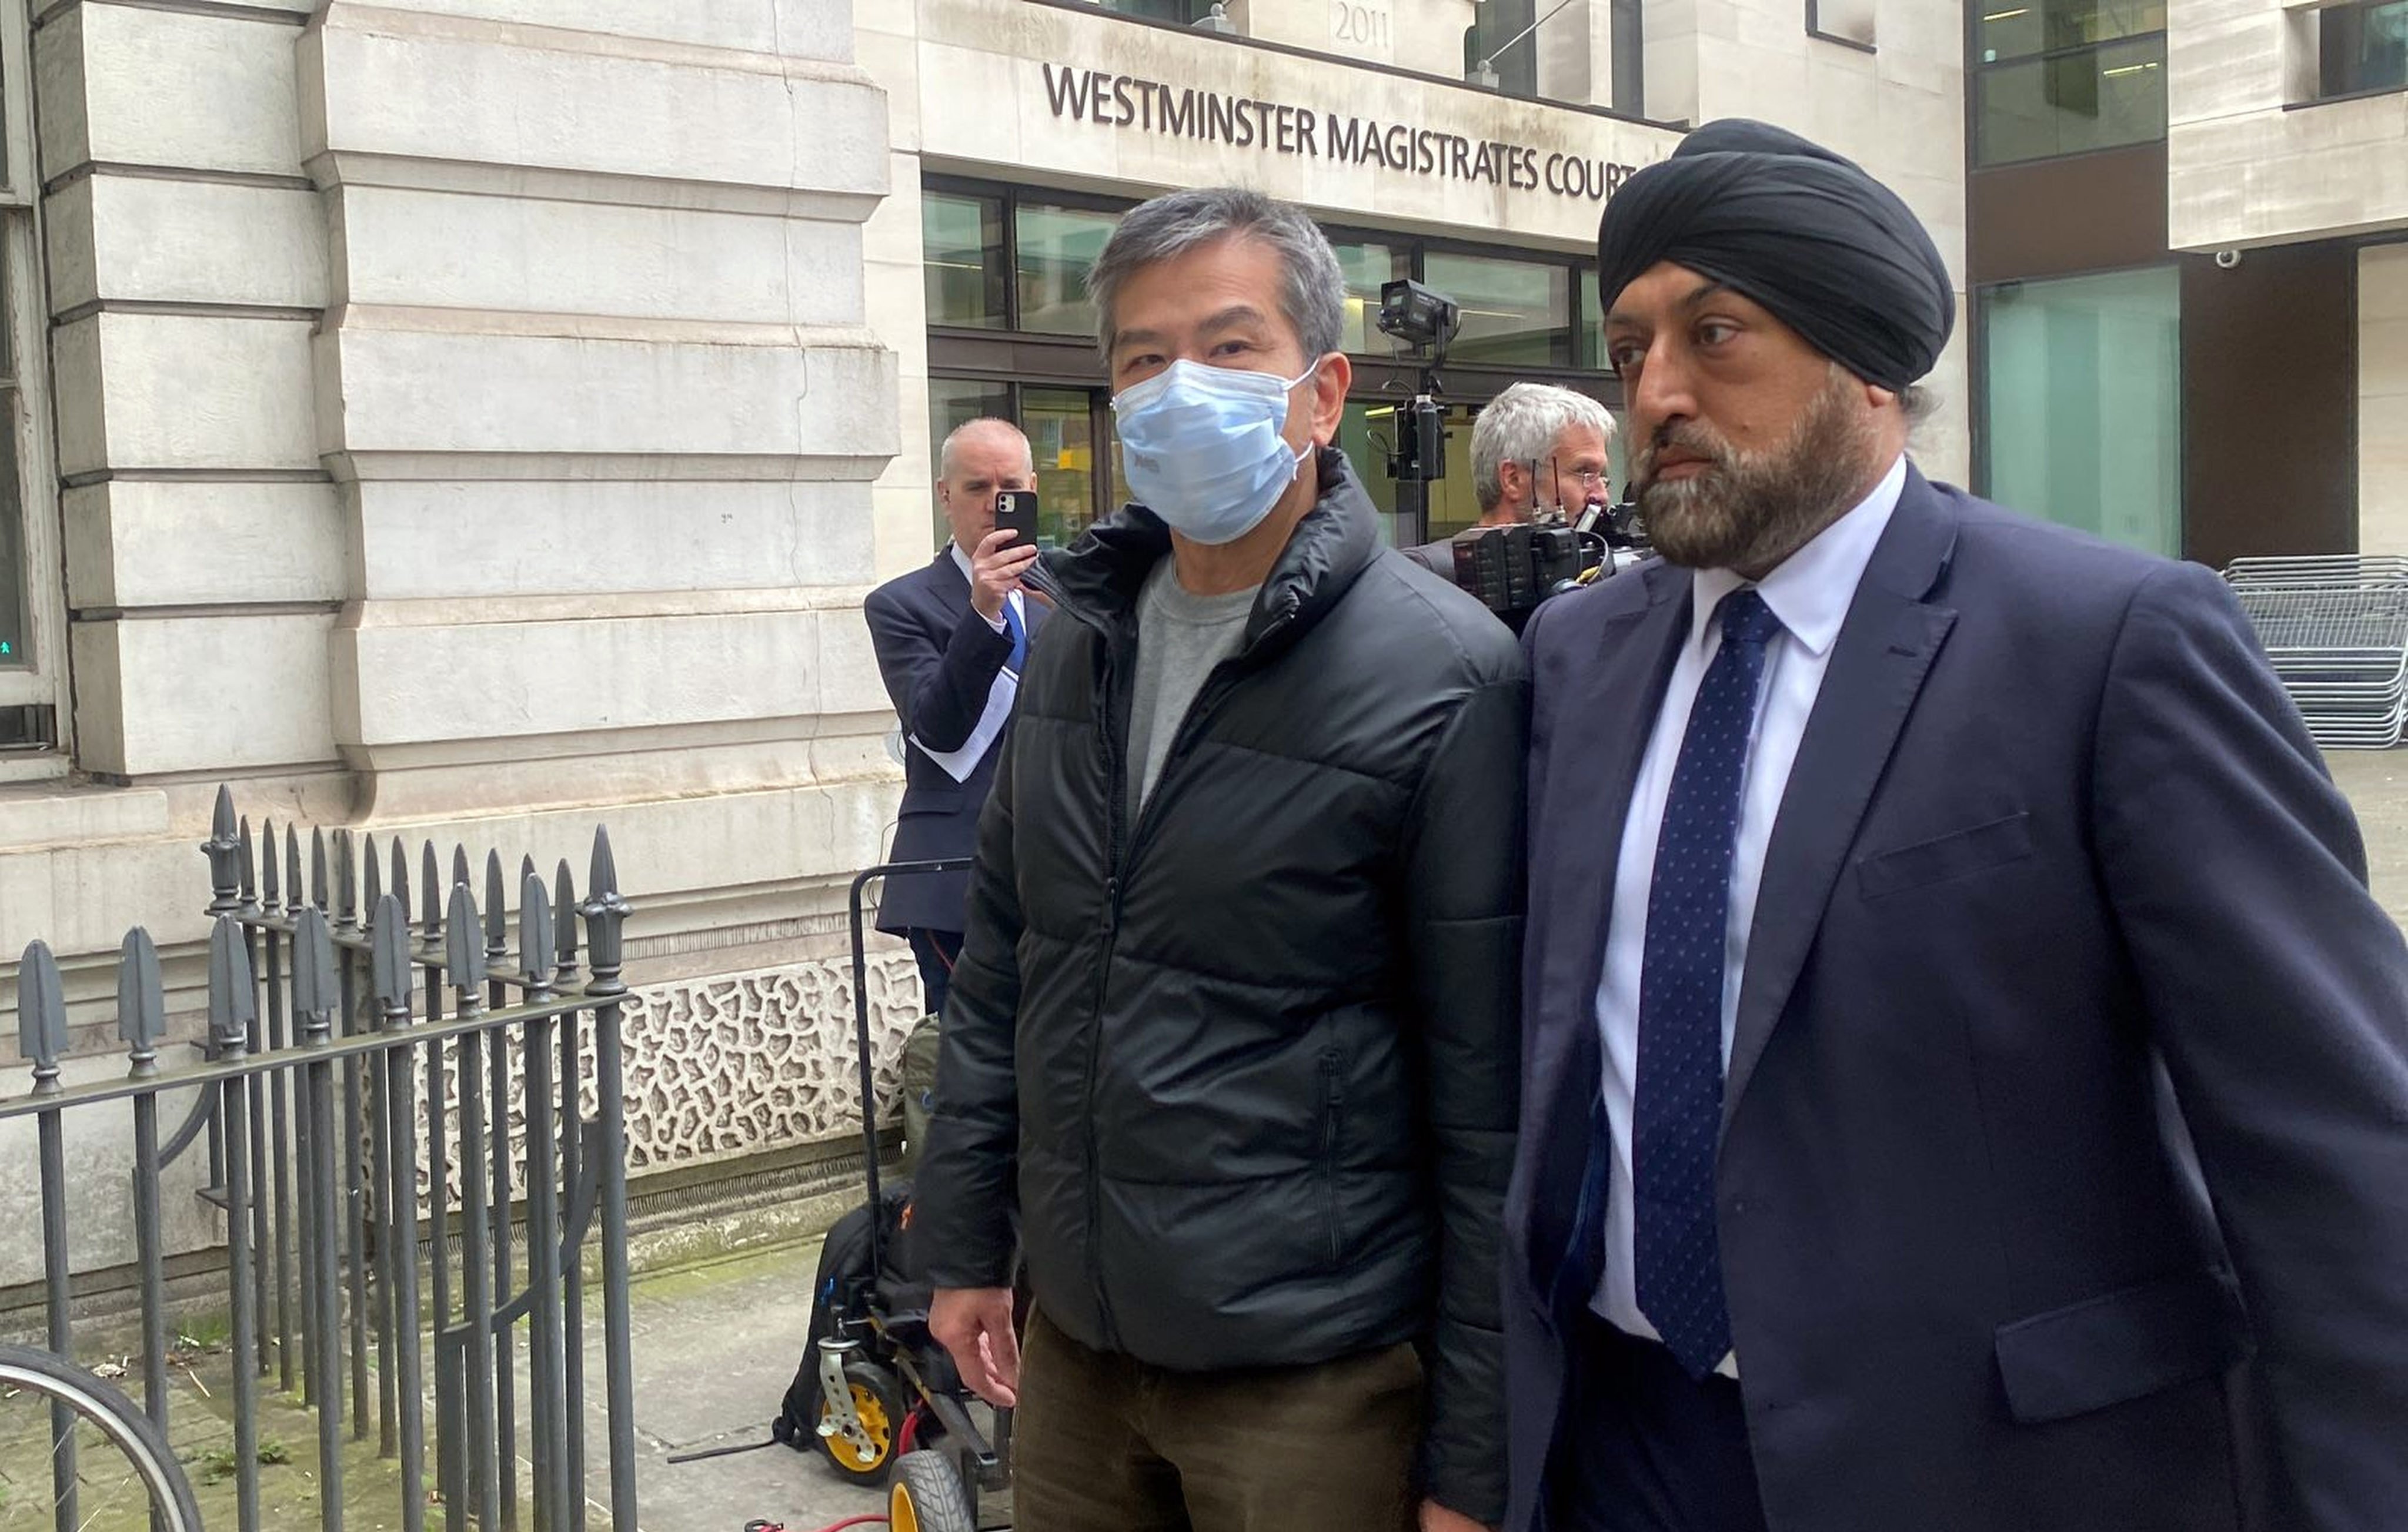 Bill Yuen (left) appeared at Westminster Magistrates’ Court on Monday. Photo: Jack Tsang